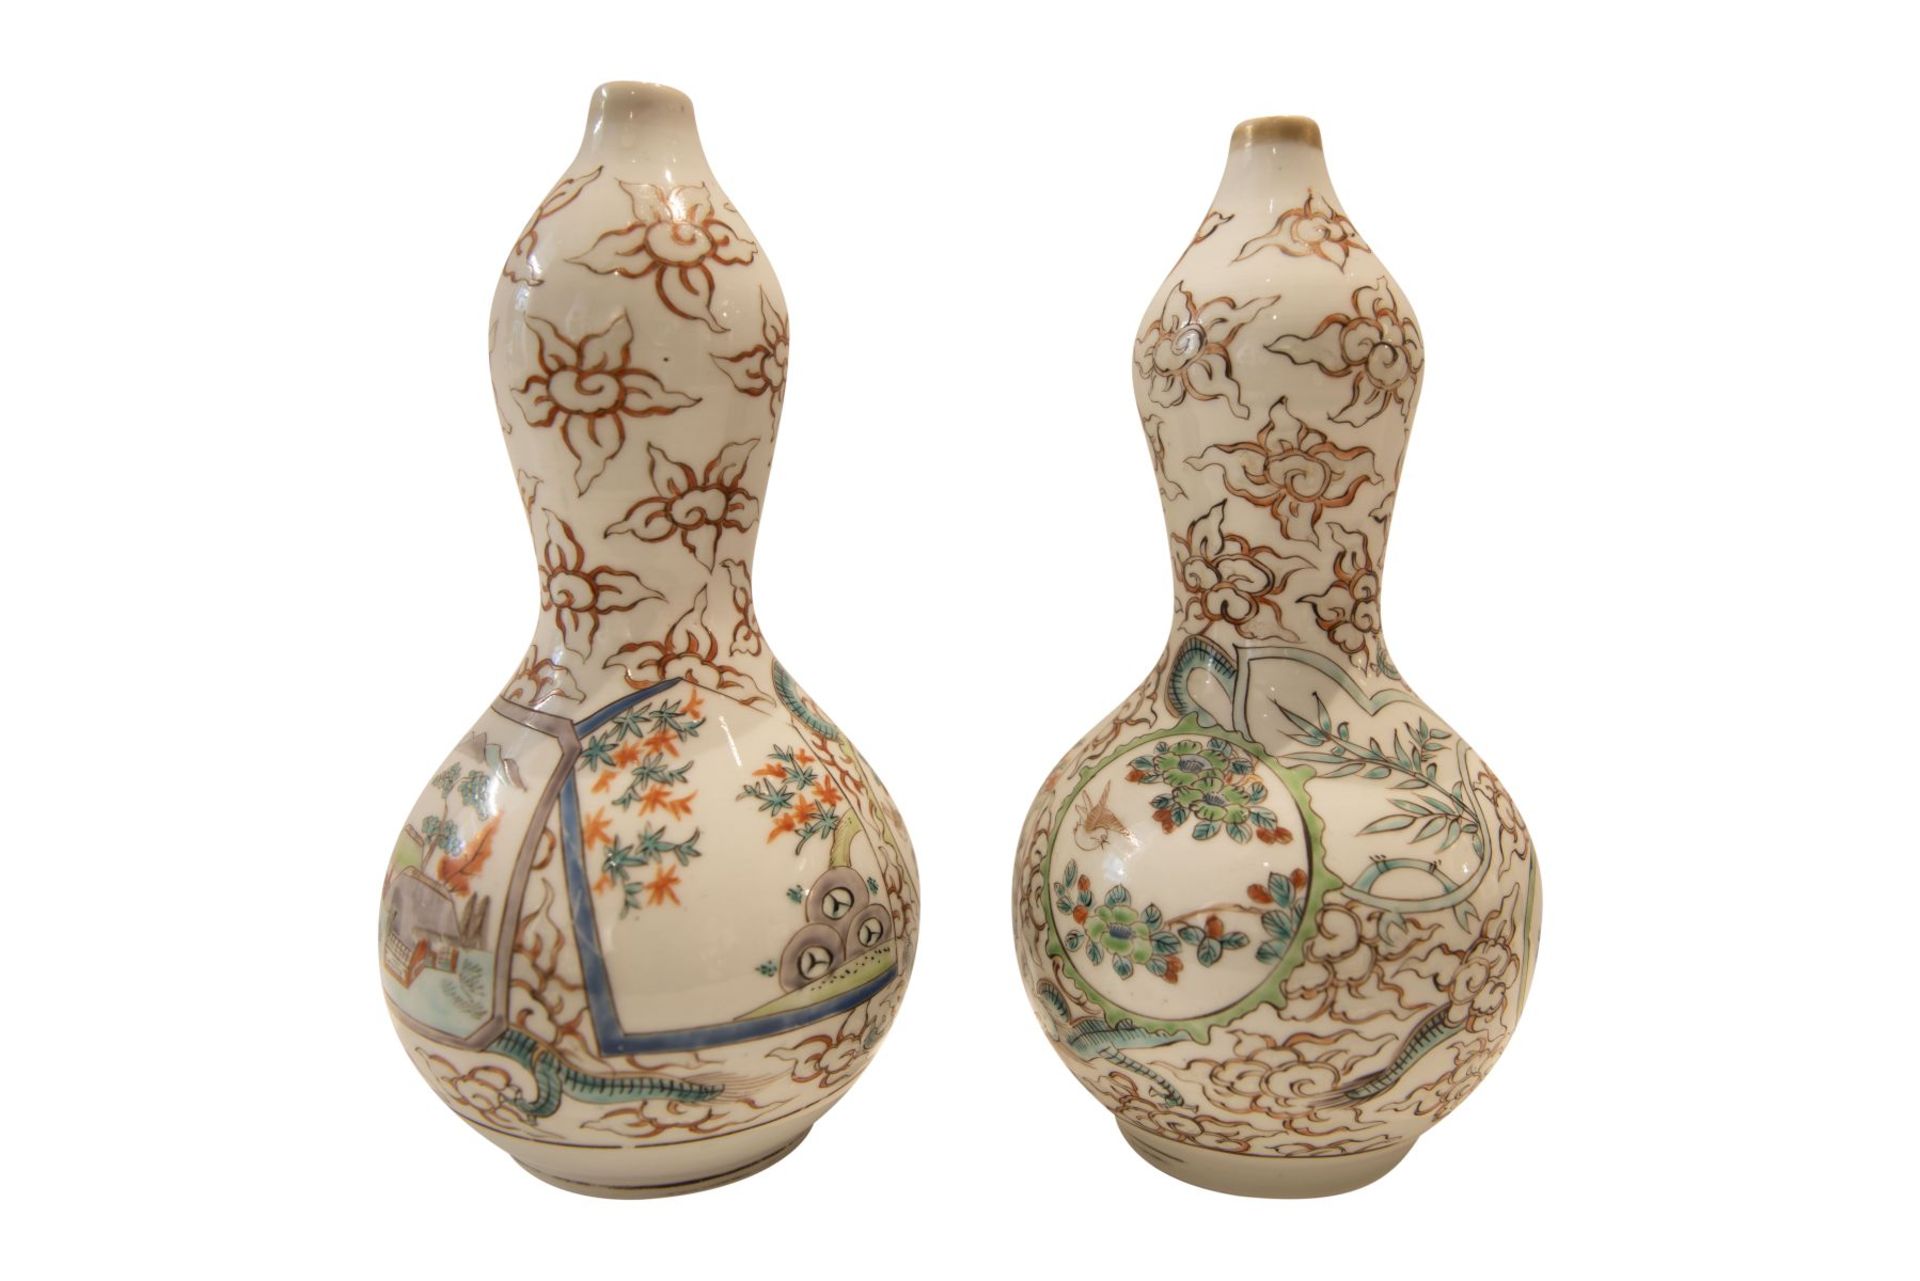 2 Asian vases - Image 4 of 5